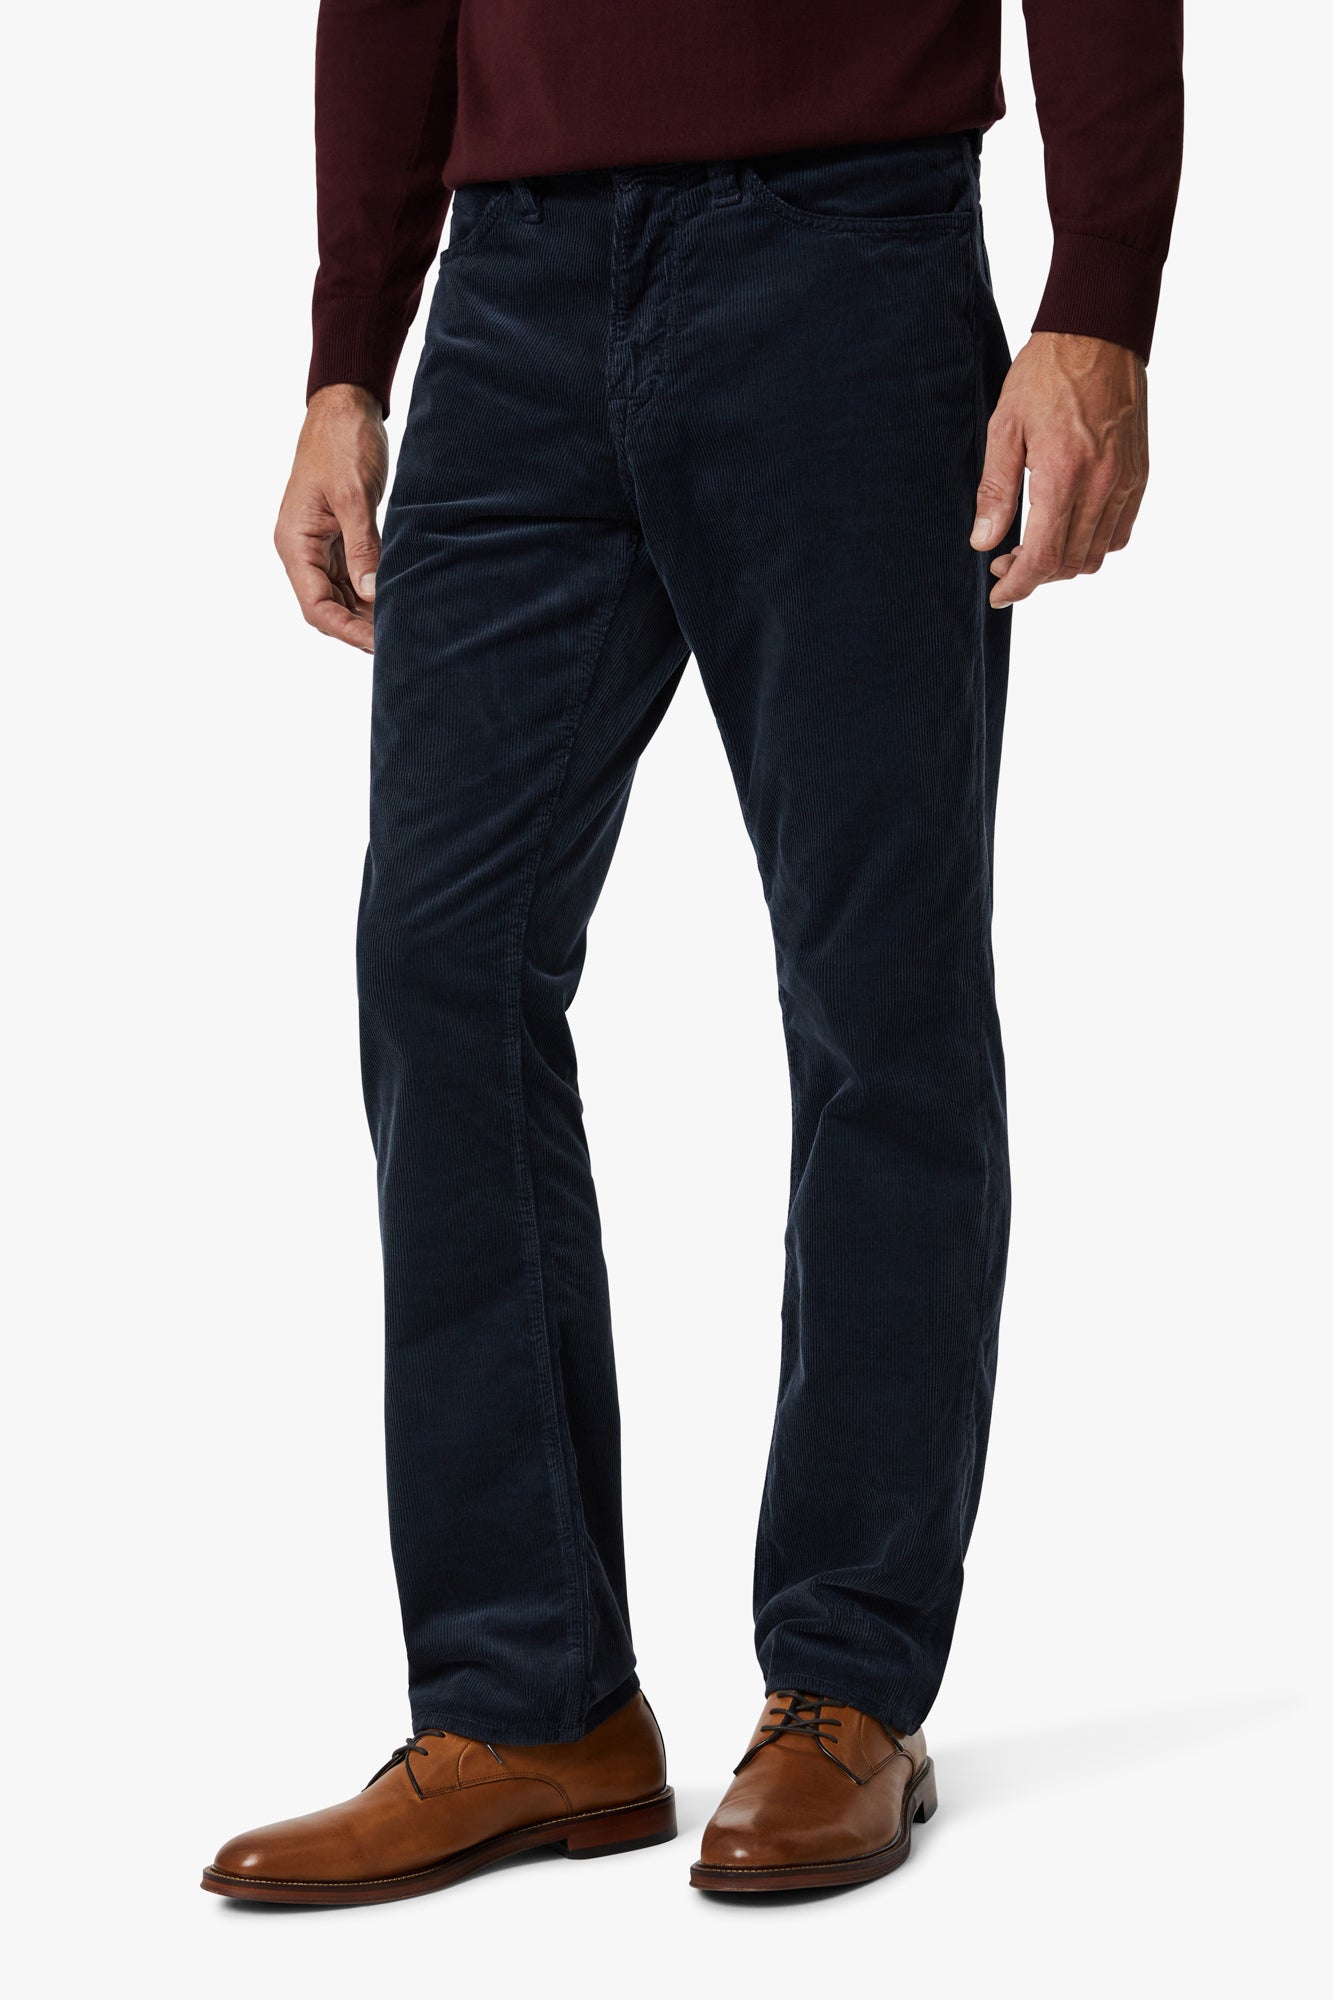 Charisma Relaxed Straight Pants In Navy Cord Image 3